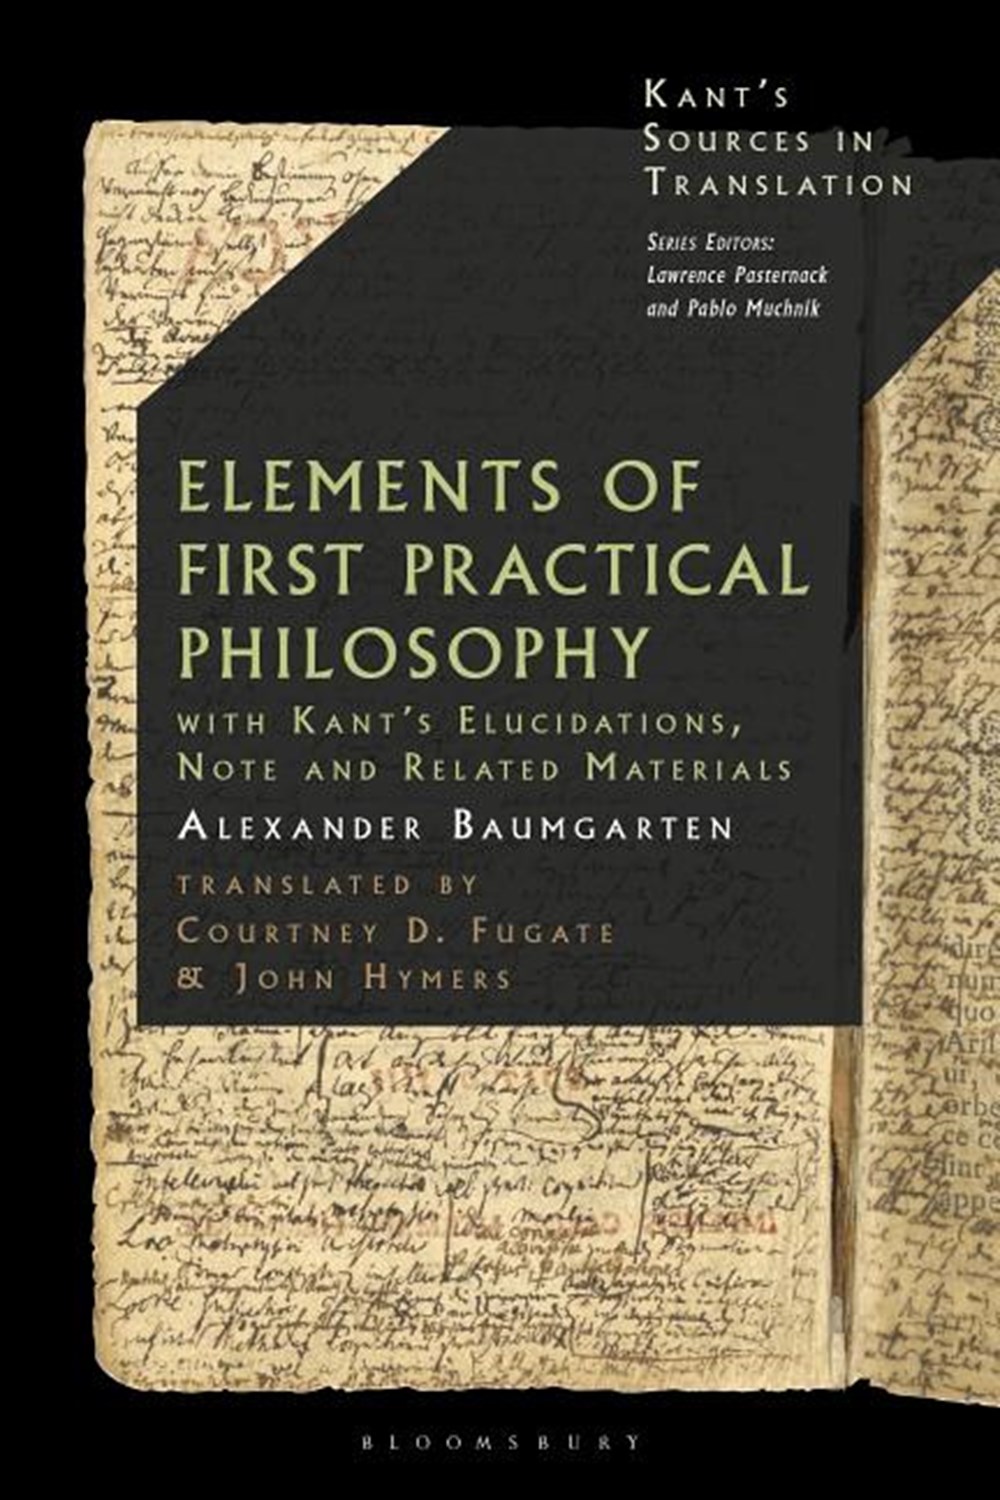 Baumgarten's Elements of First Practical Philosophy: A Critical Translation with Kant's Reflections 